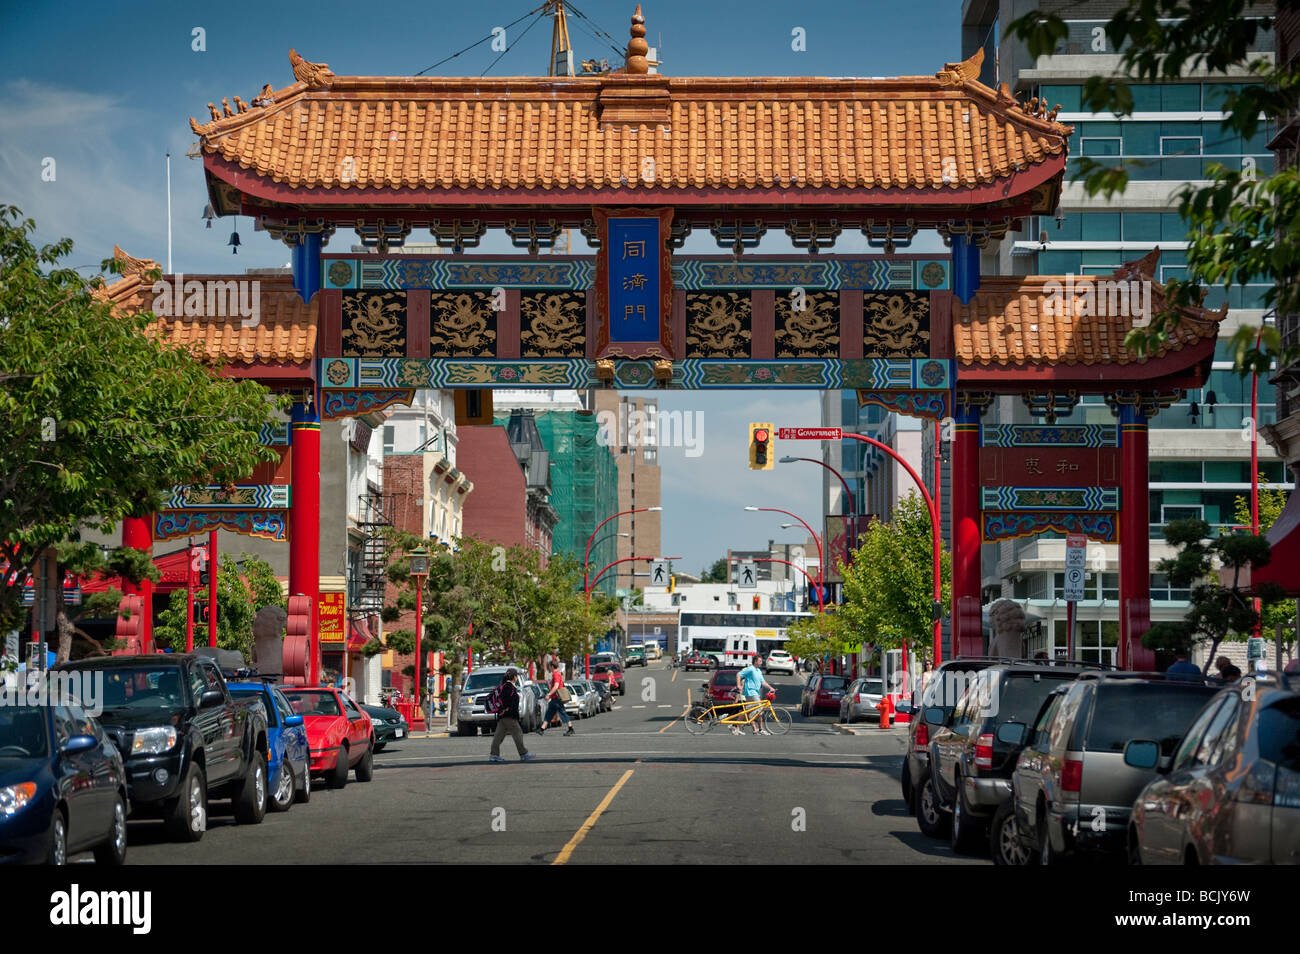 Victoria, British Columbia. The entrance to Chinatown is marked by the beautiful Gate of Harmonious Interest. Stock Photo